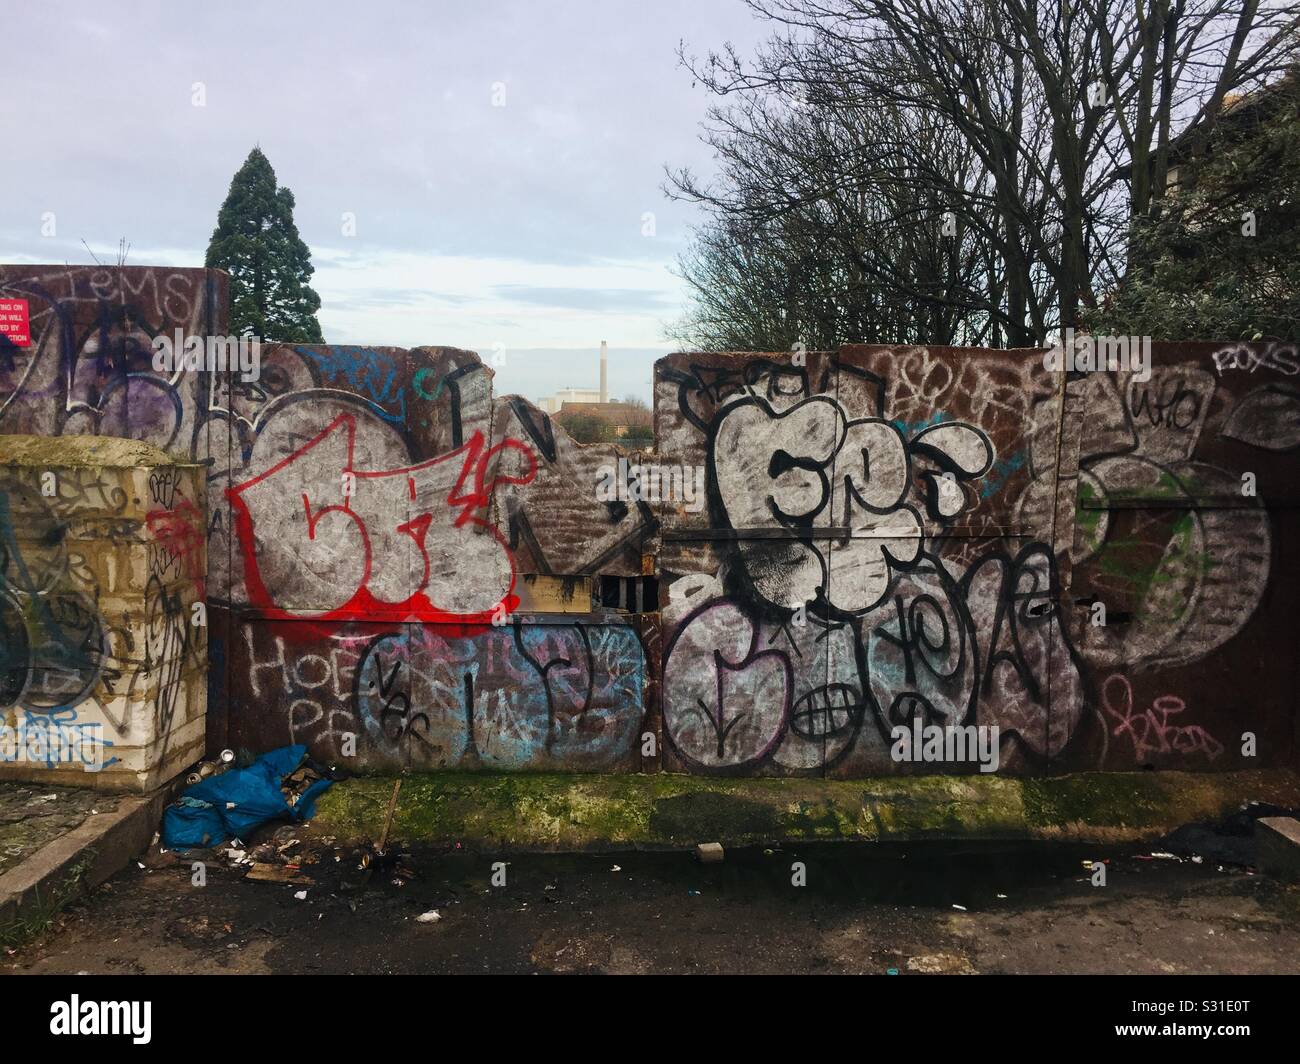 A graffiti covered wooden fence in New Cross, SE London. Stock Photo